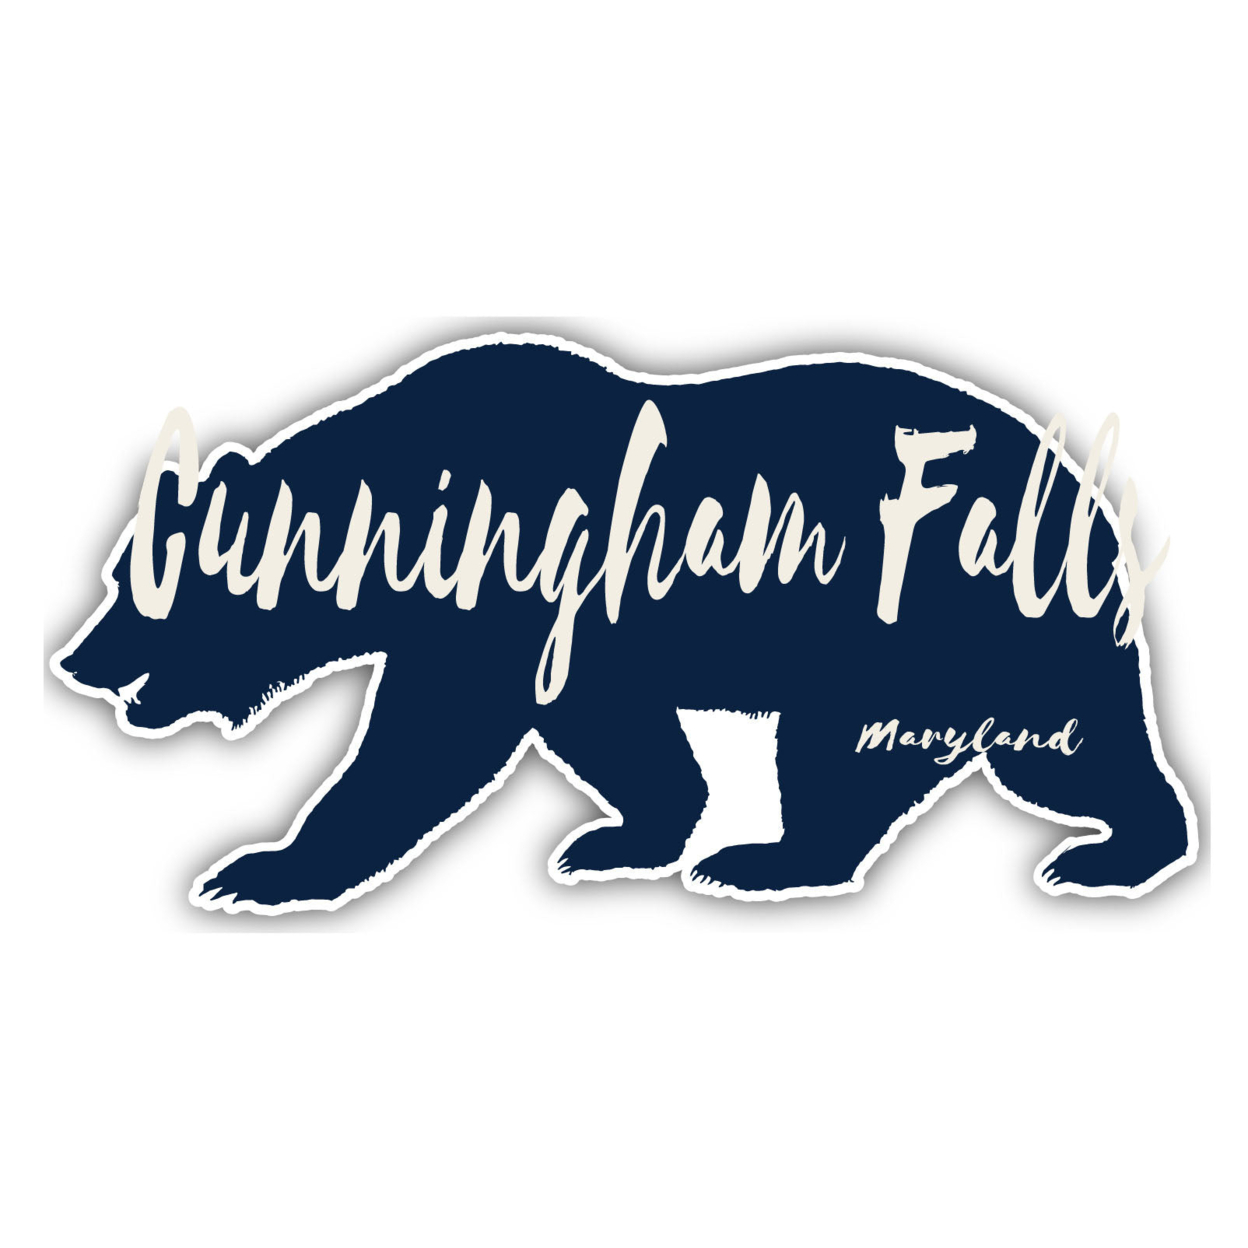 Cunningham Falls Maryland Souvenir Decorative Stickers (Choose Theme And Size) - 4-Pack, 2-Inch, Bear